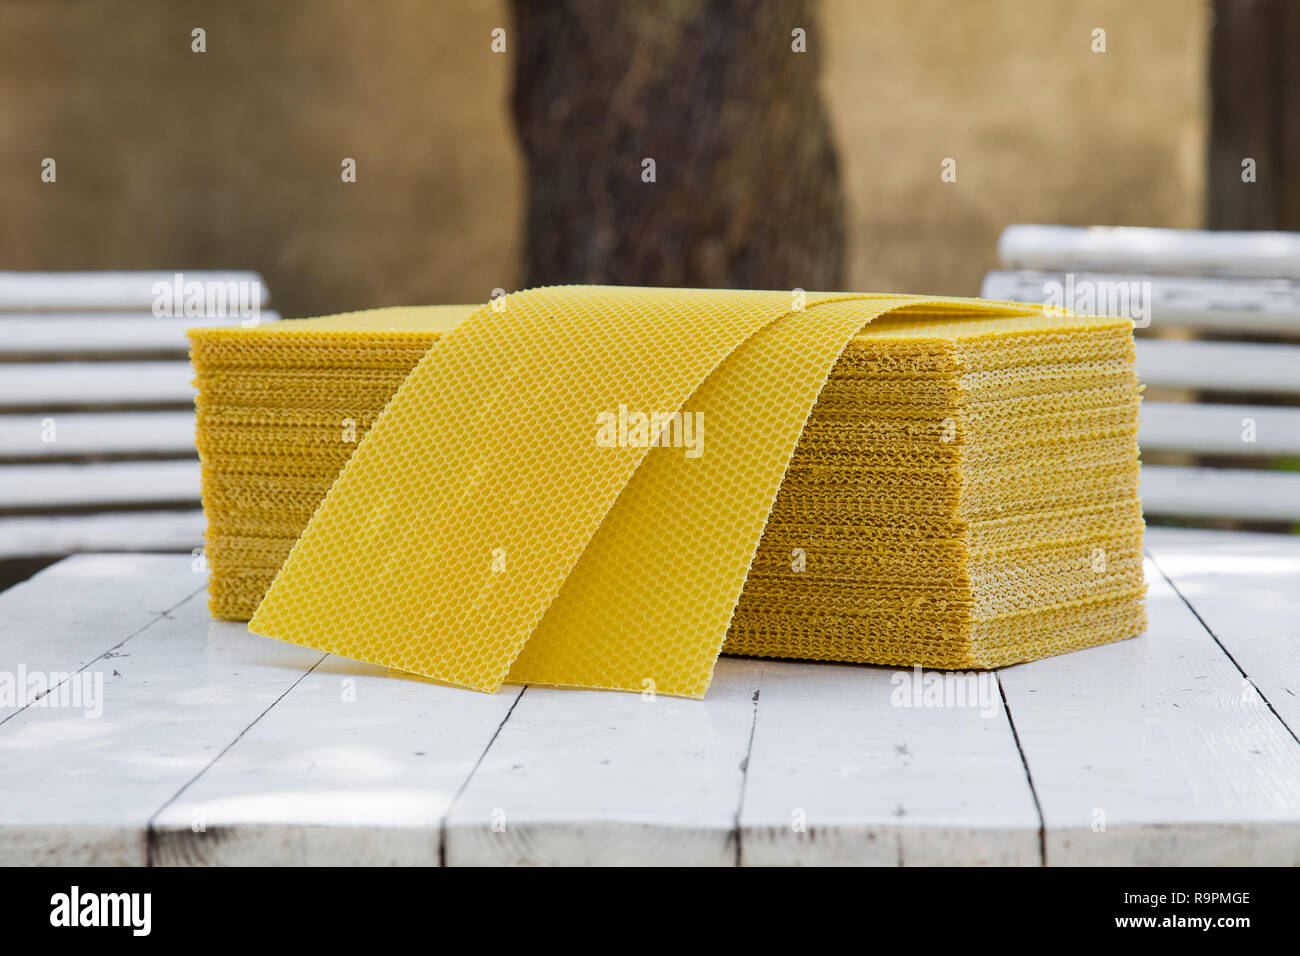 Plates of wax foundation - stack of apiary honeycomb base elements on wooden table. Image of basic beekeeping tools - wax foundation in rustic scenery Stock Photo